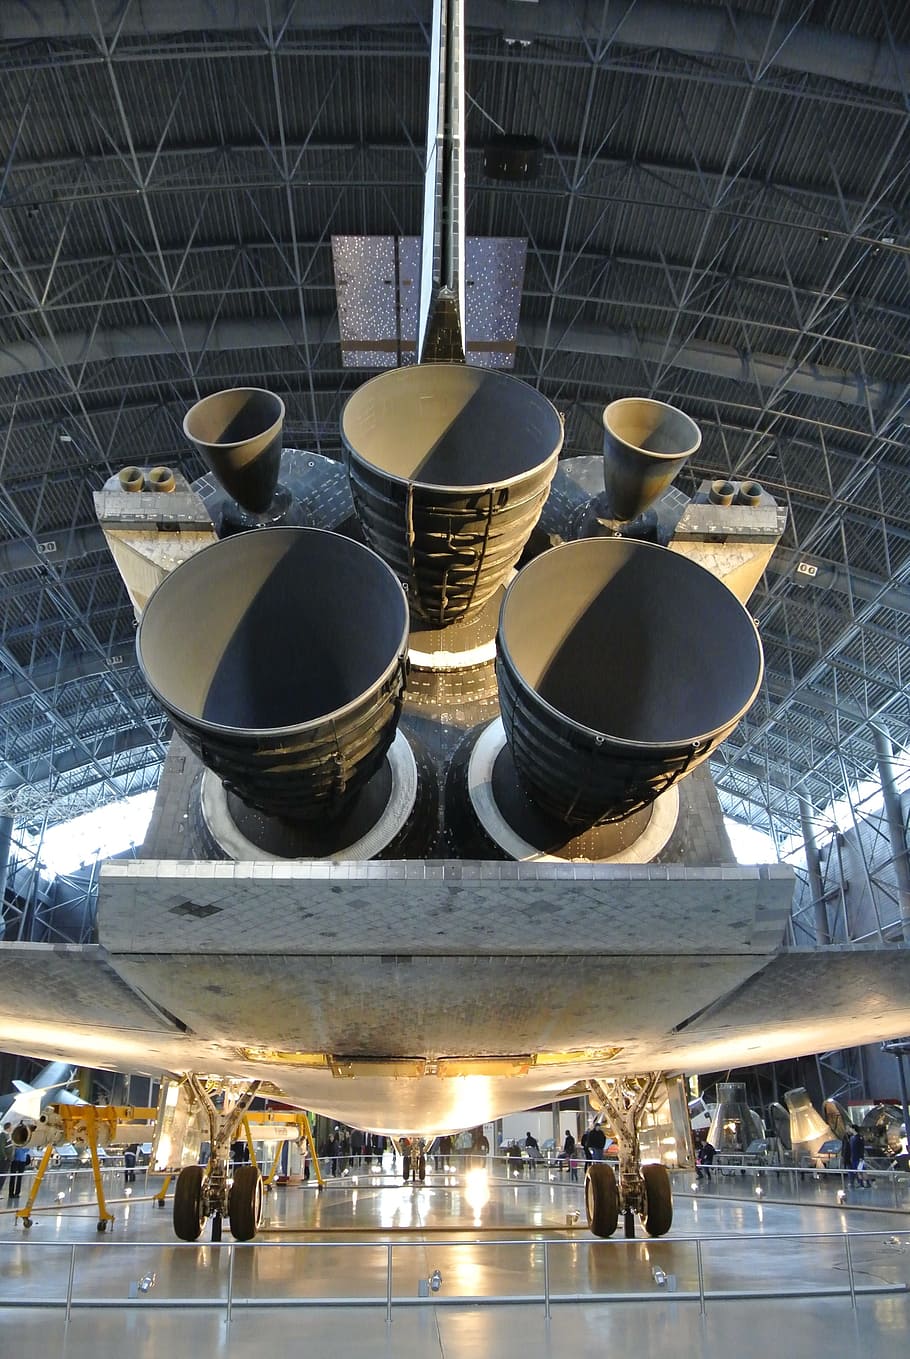 Boosters, Shuttle, Space, Spaceship, technology, rocket, launch